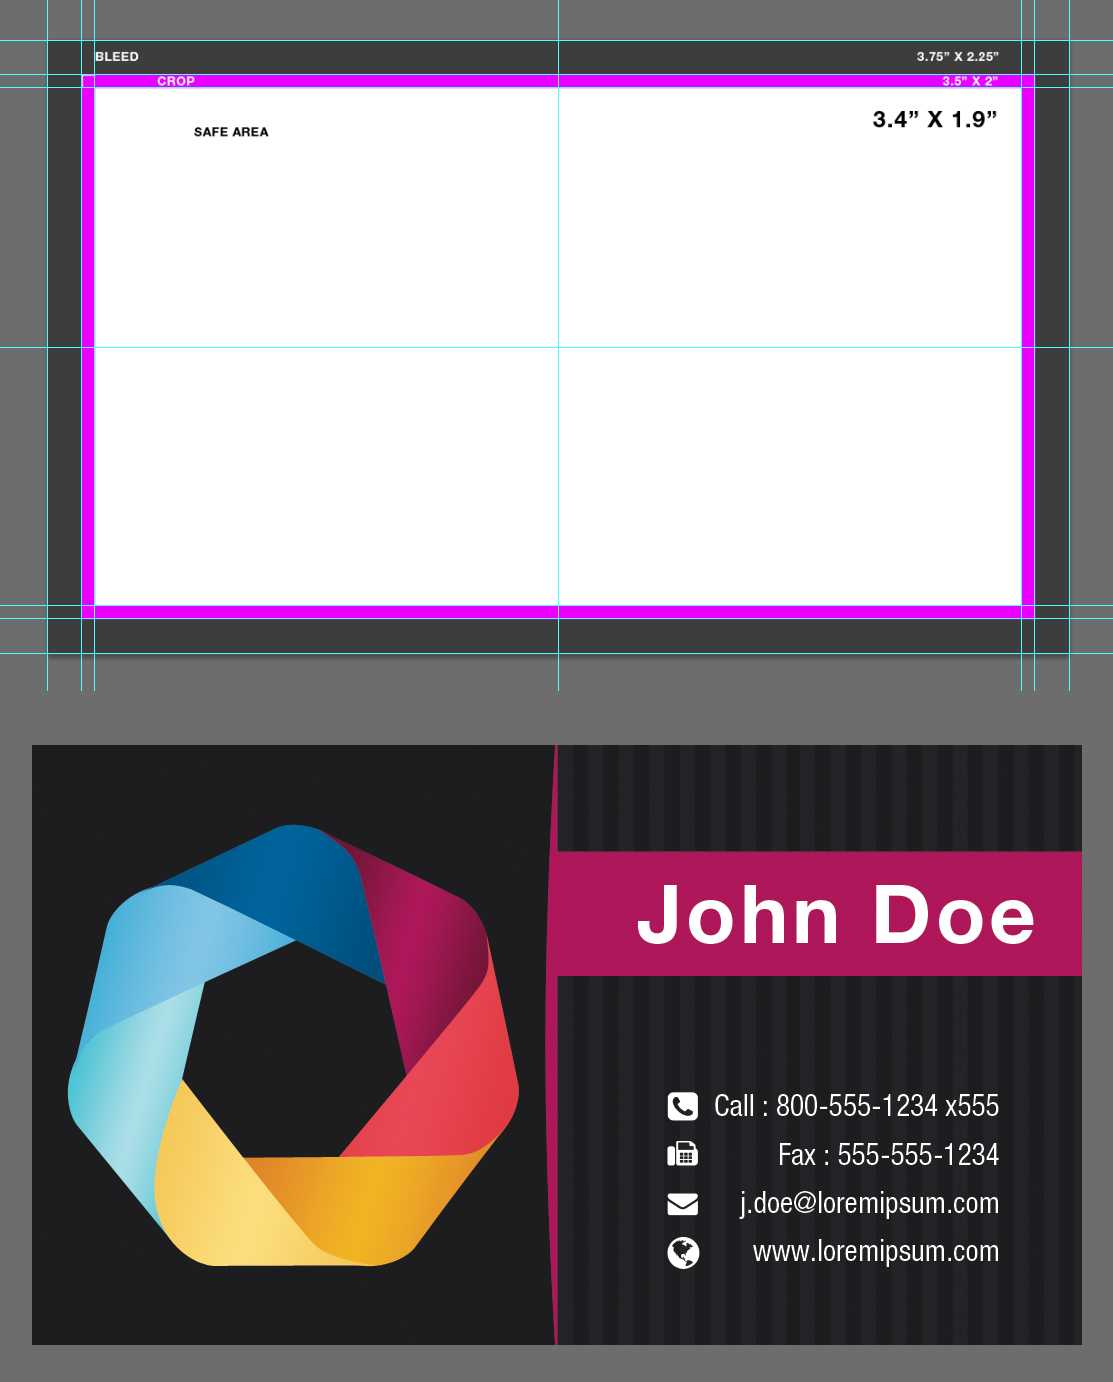 Blank Business Card Template Psdxxdigipxx On Deviantart Intended For Photoshop Business Card Template With Bleed